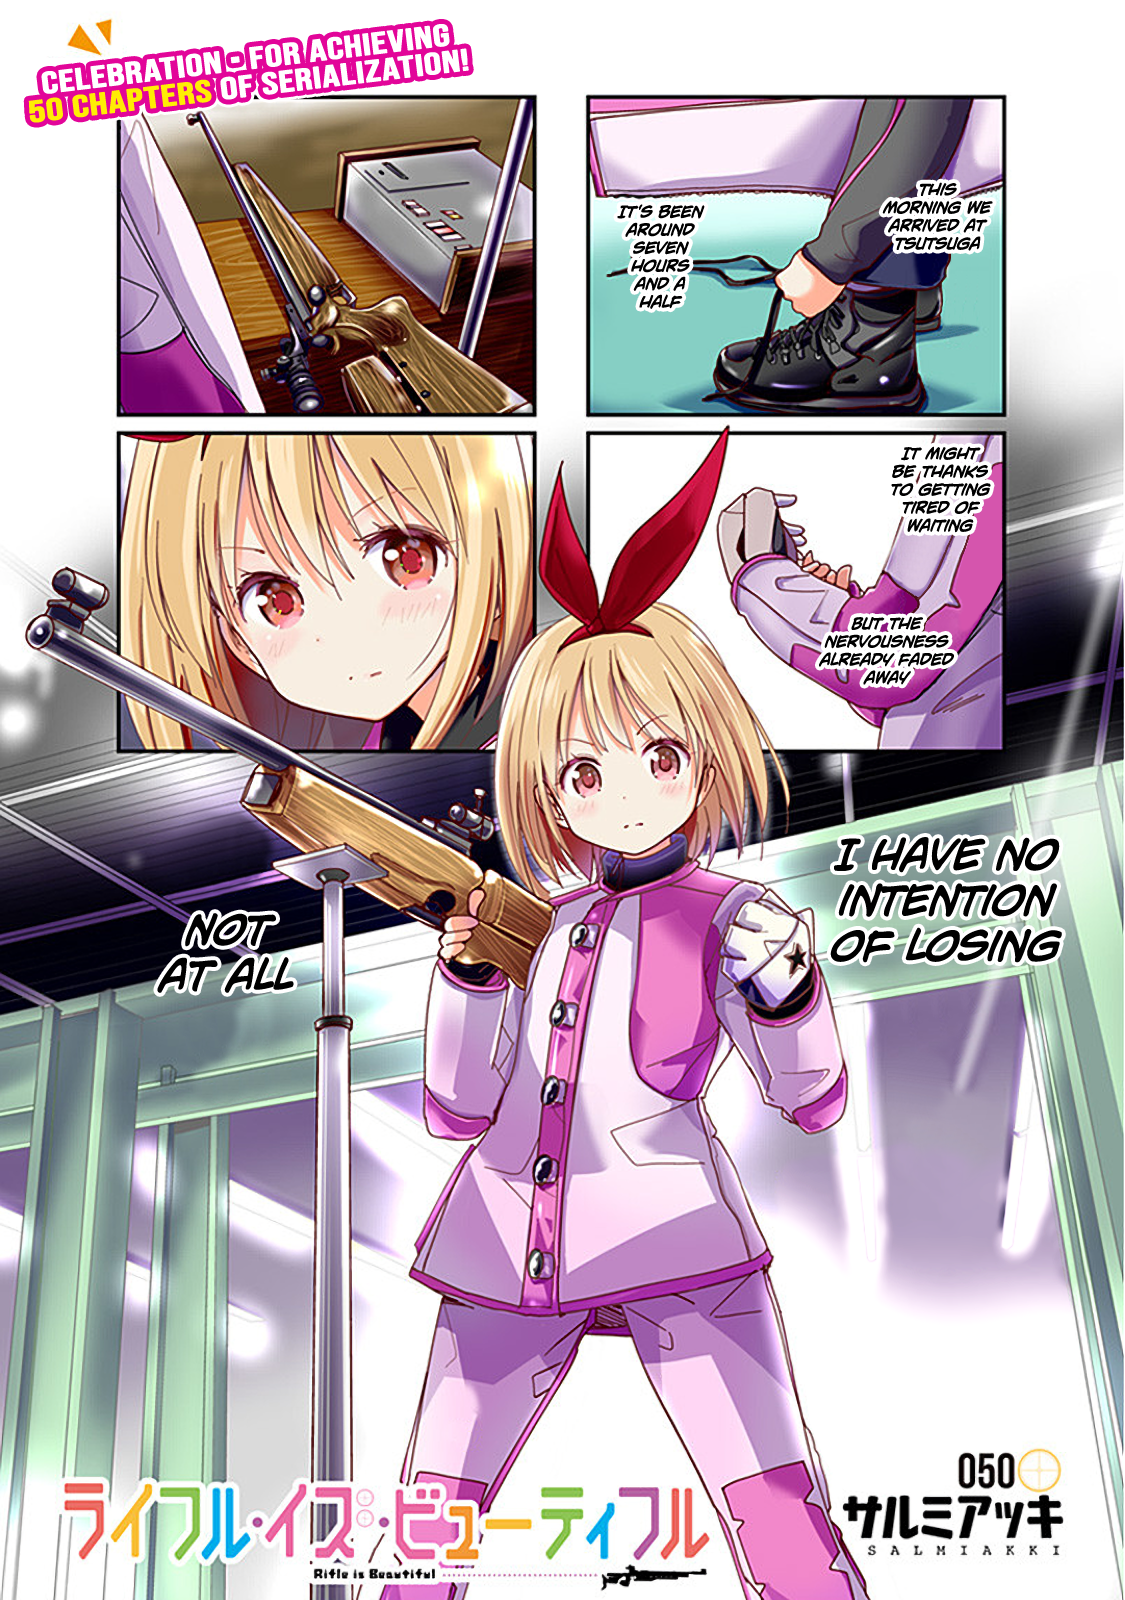 Rifle Is Beautiful Vol.3 Chapter 50: Celebration・for Achieving 50 Chapters Of Serialization! - Picture 1